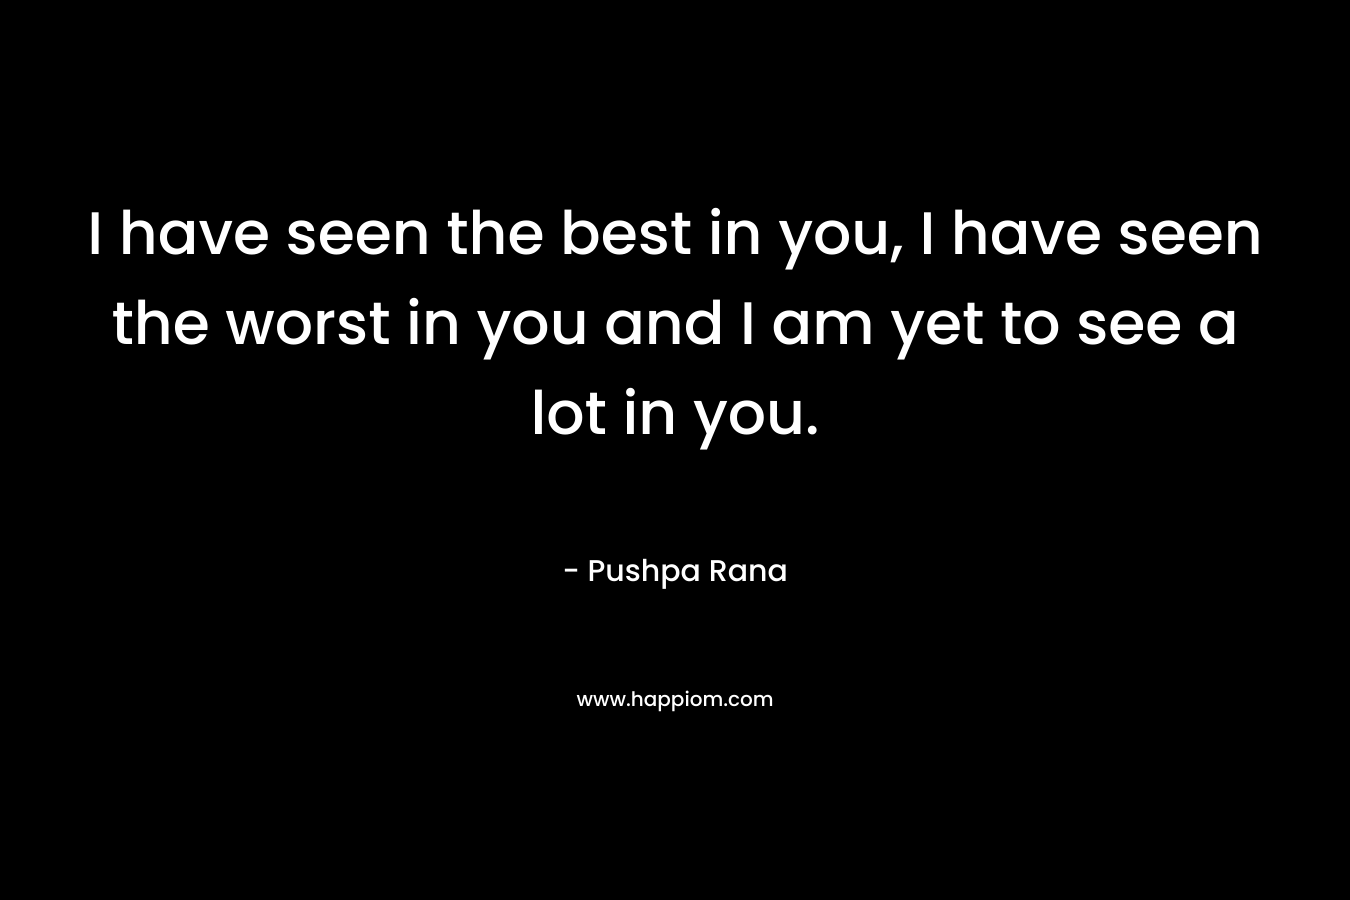 I have seen the best in you, I have seen the worst in you and I am yet to see a lot in you. – Pushpa Rana